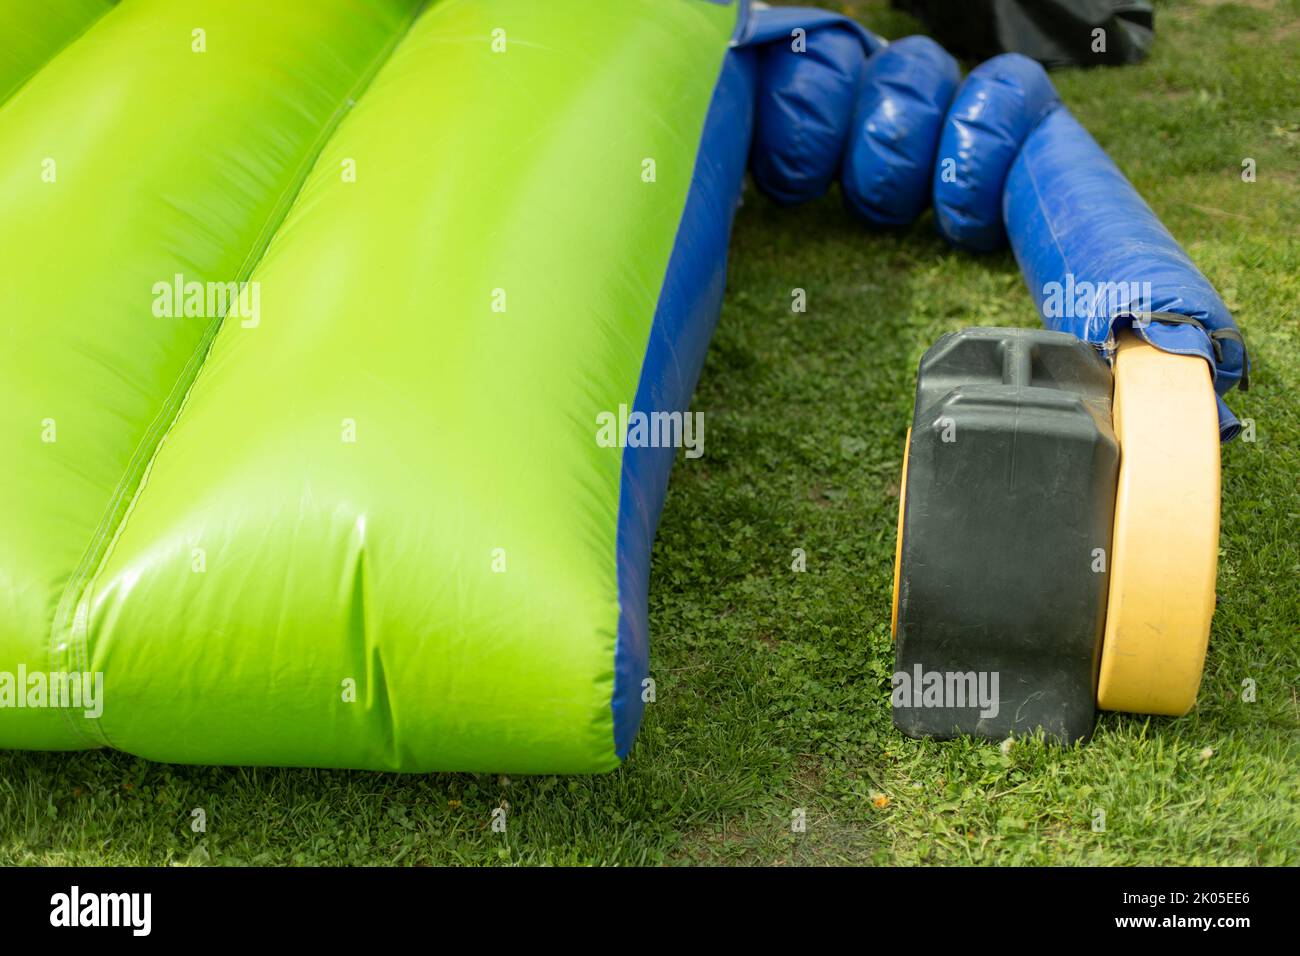 Inflate obstacle course using air generator. Obstacle course in park. Stock Photo